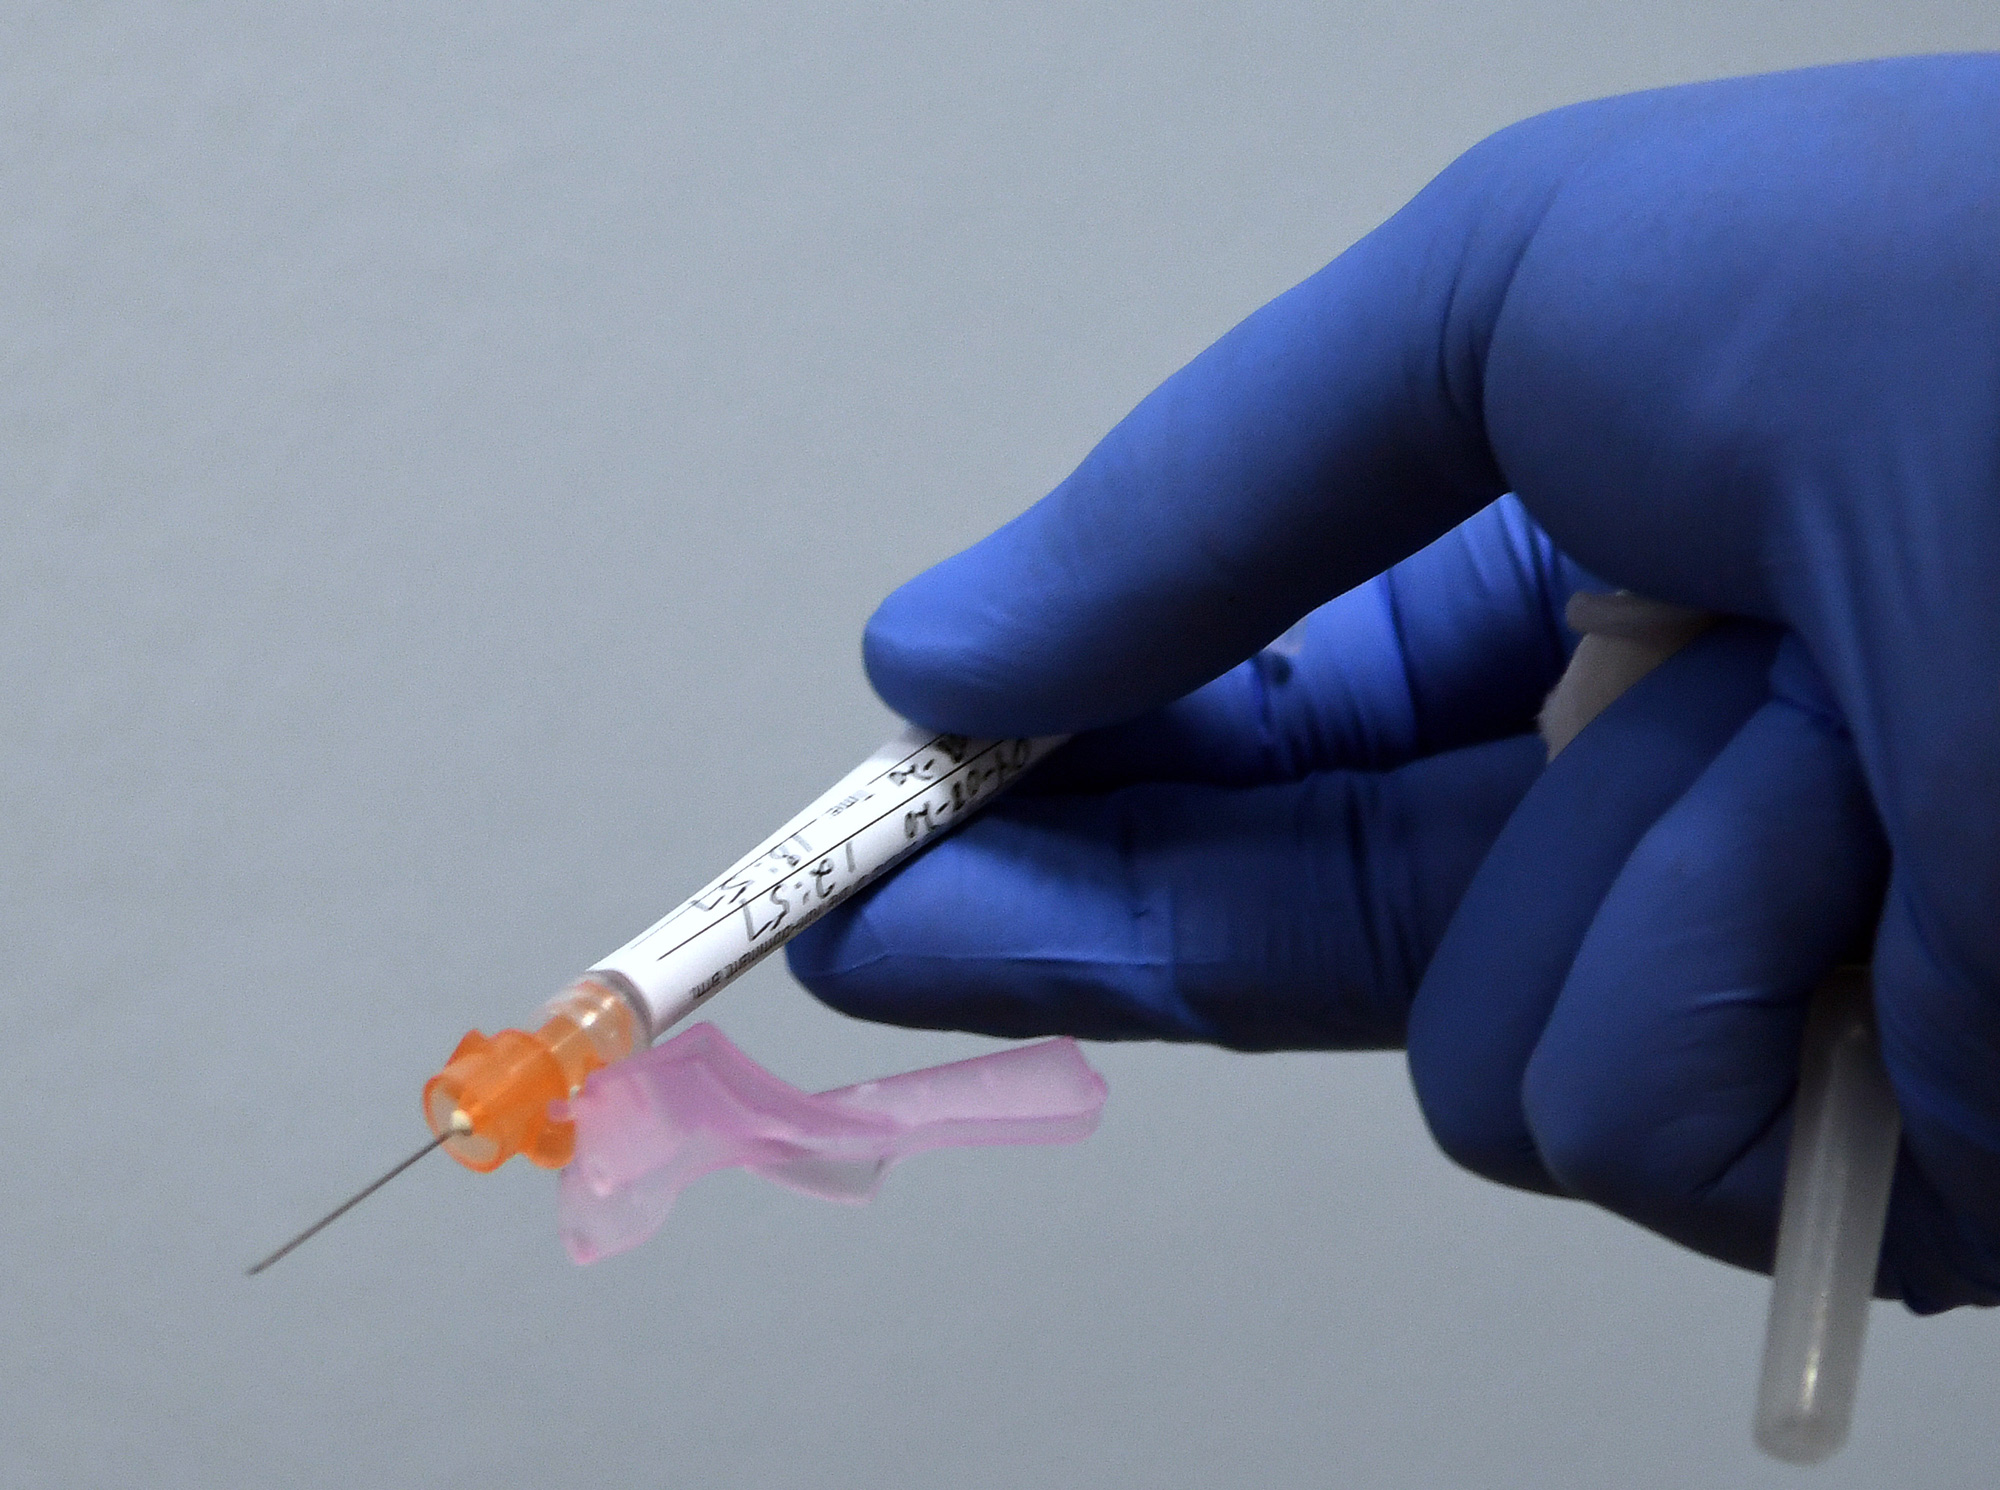 A syringe containing either the vaccine or a placebo is prepared for a participant in a Phase 3 COVID-19 vaccine clinical trial sponsored by Moderna at Accel Research Sites on August 4 in DeLand, Florida.